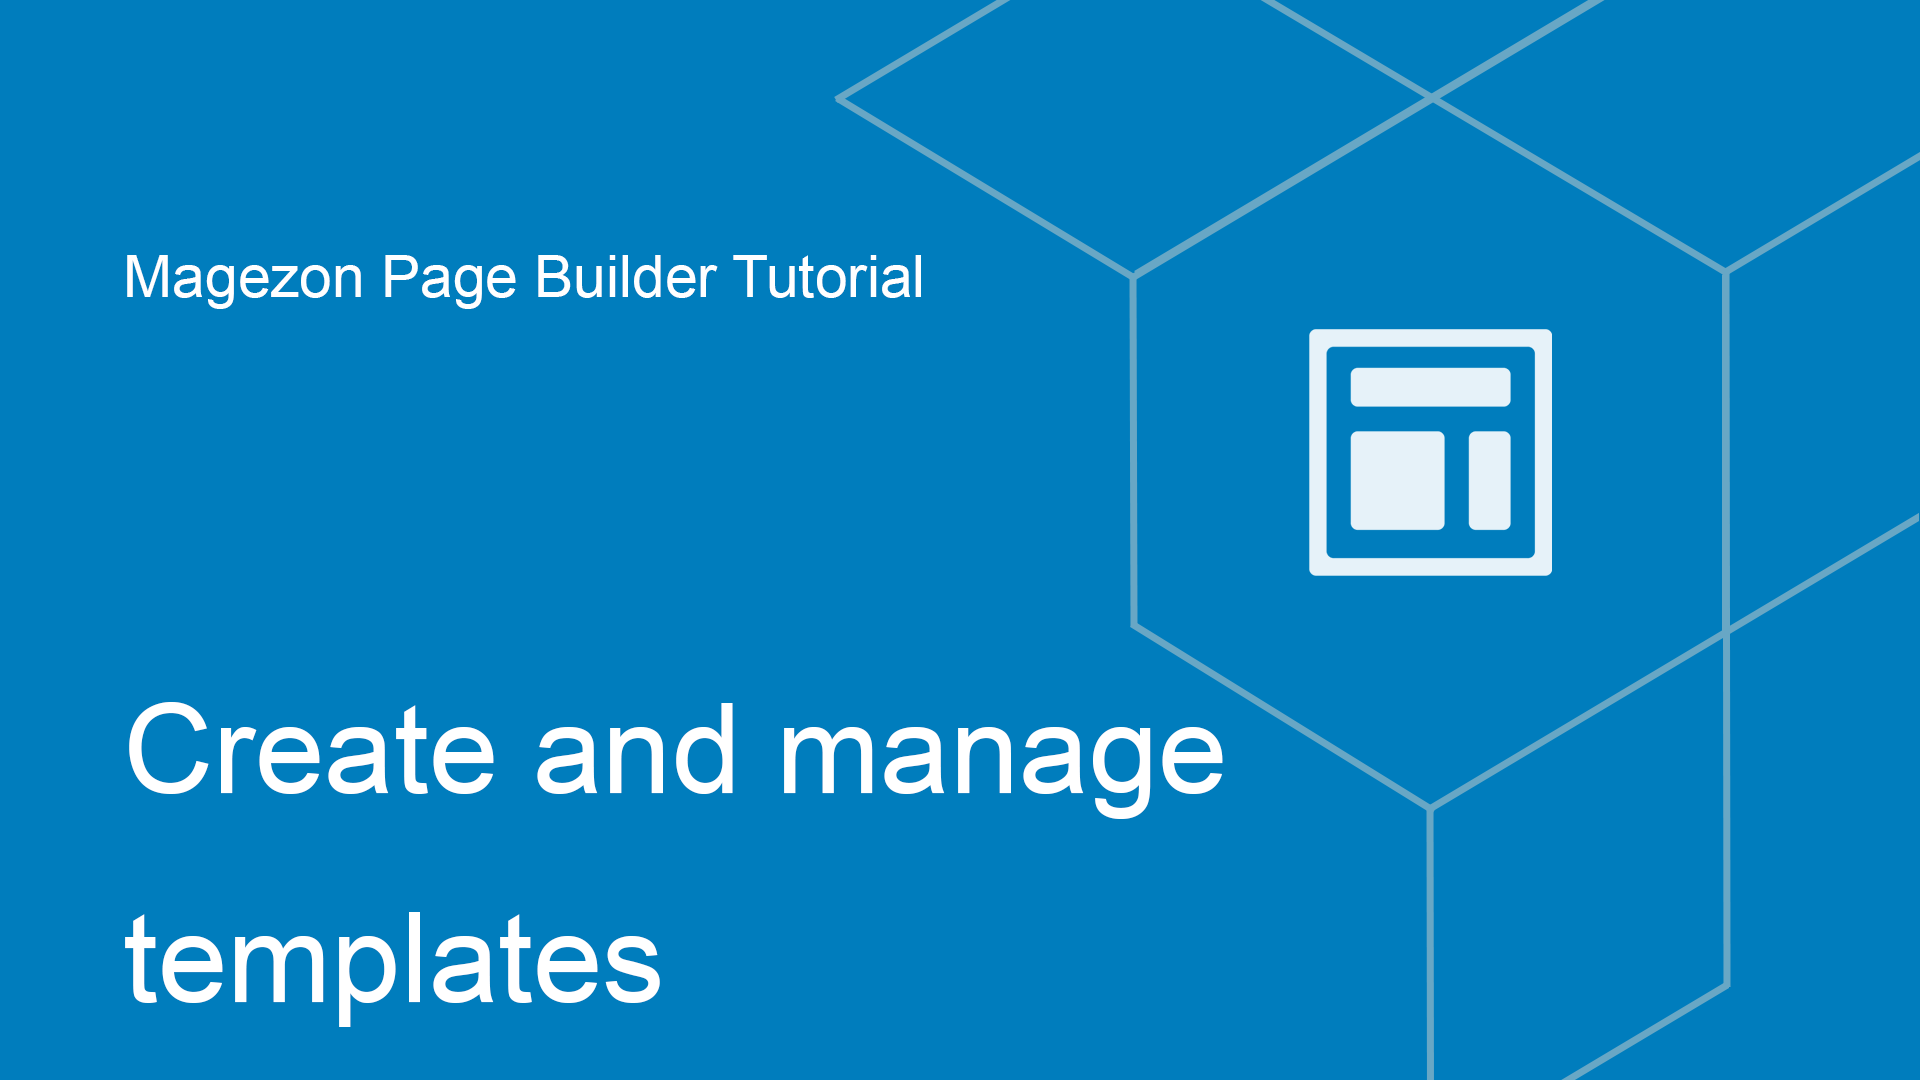 Create and manage templates in Magezon Page Builder